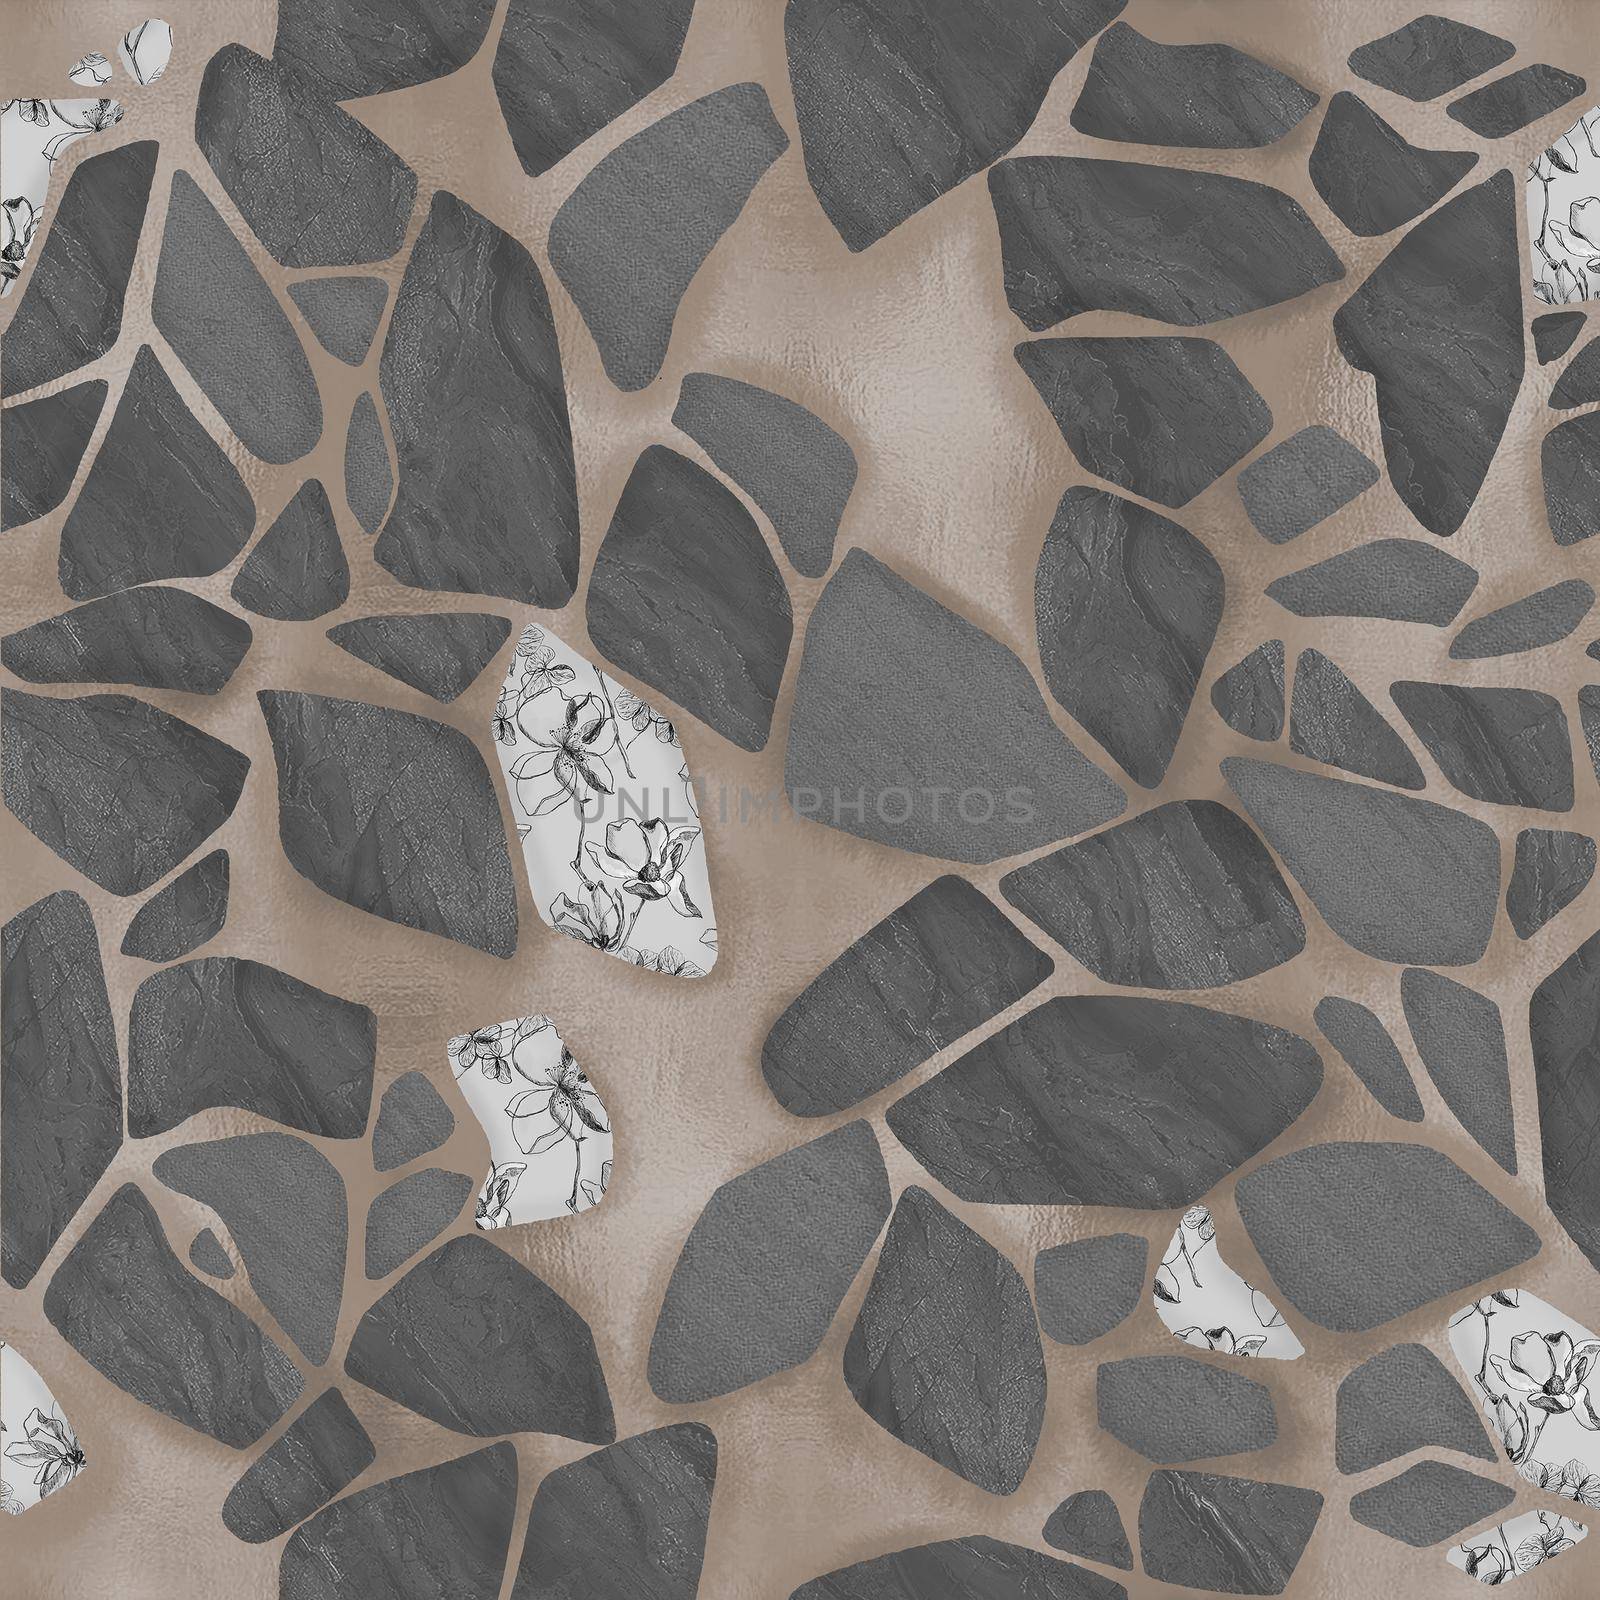 Gray seamless pattern with cracked ceramic tile texture. Kintsugi style hand drawn illuastration by fireFLYart